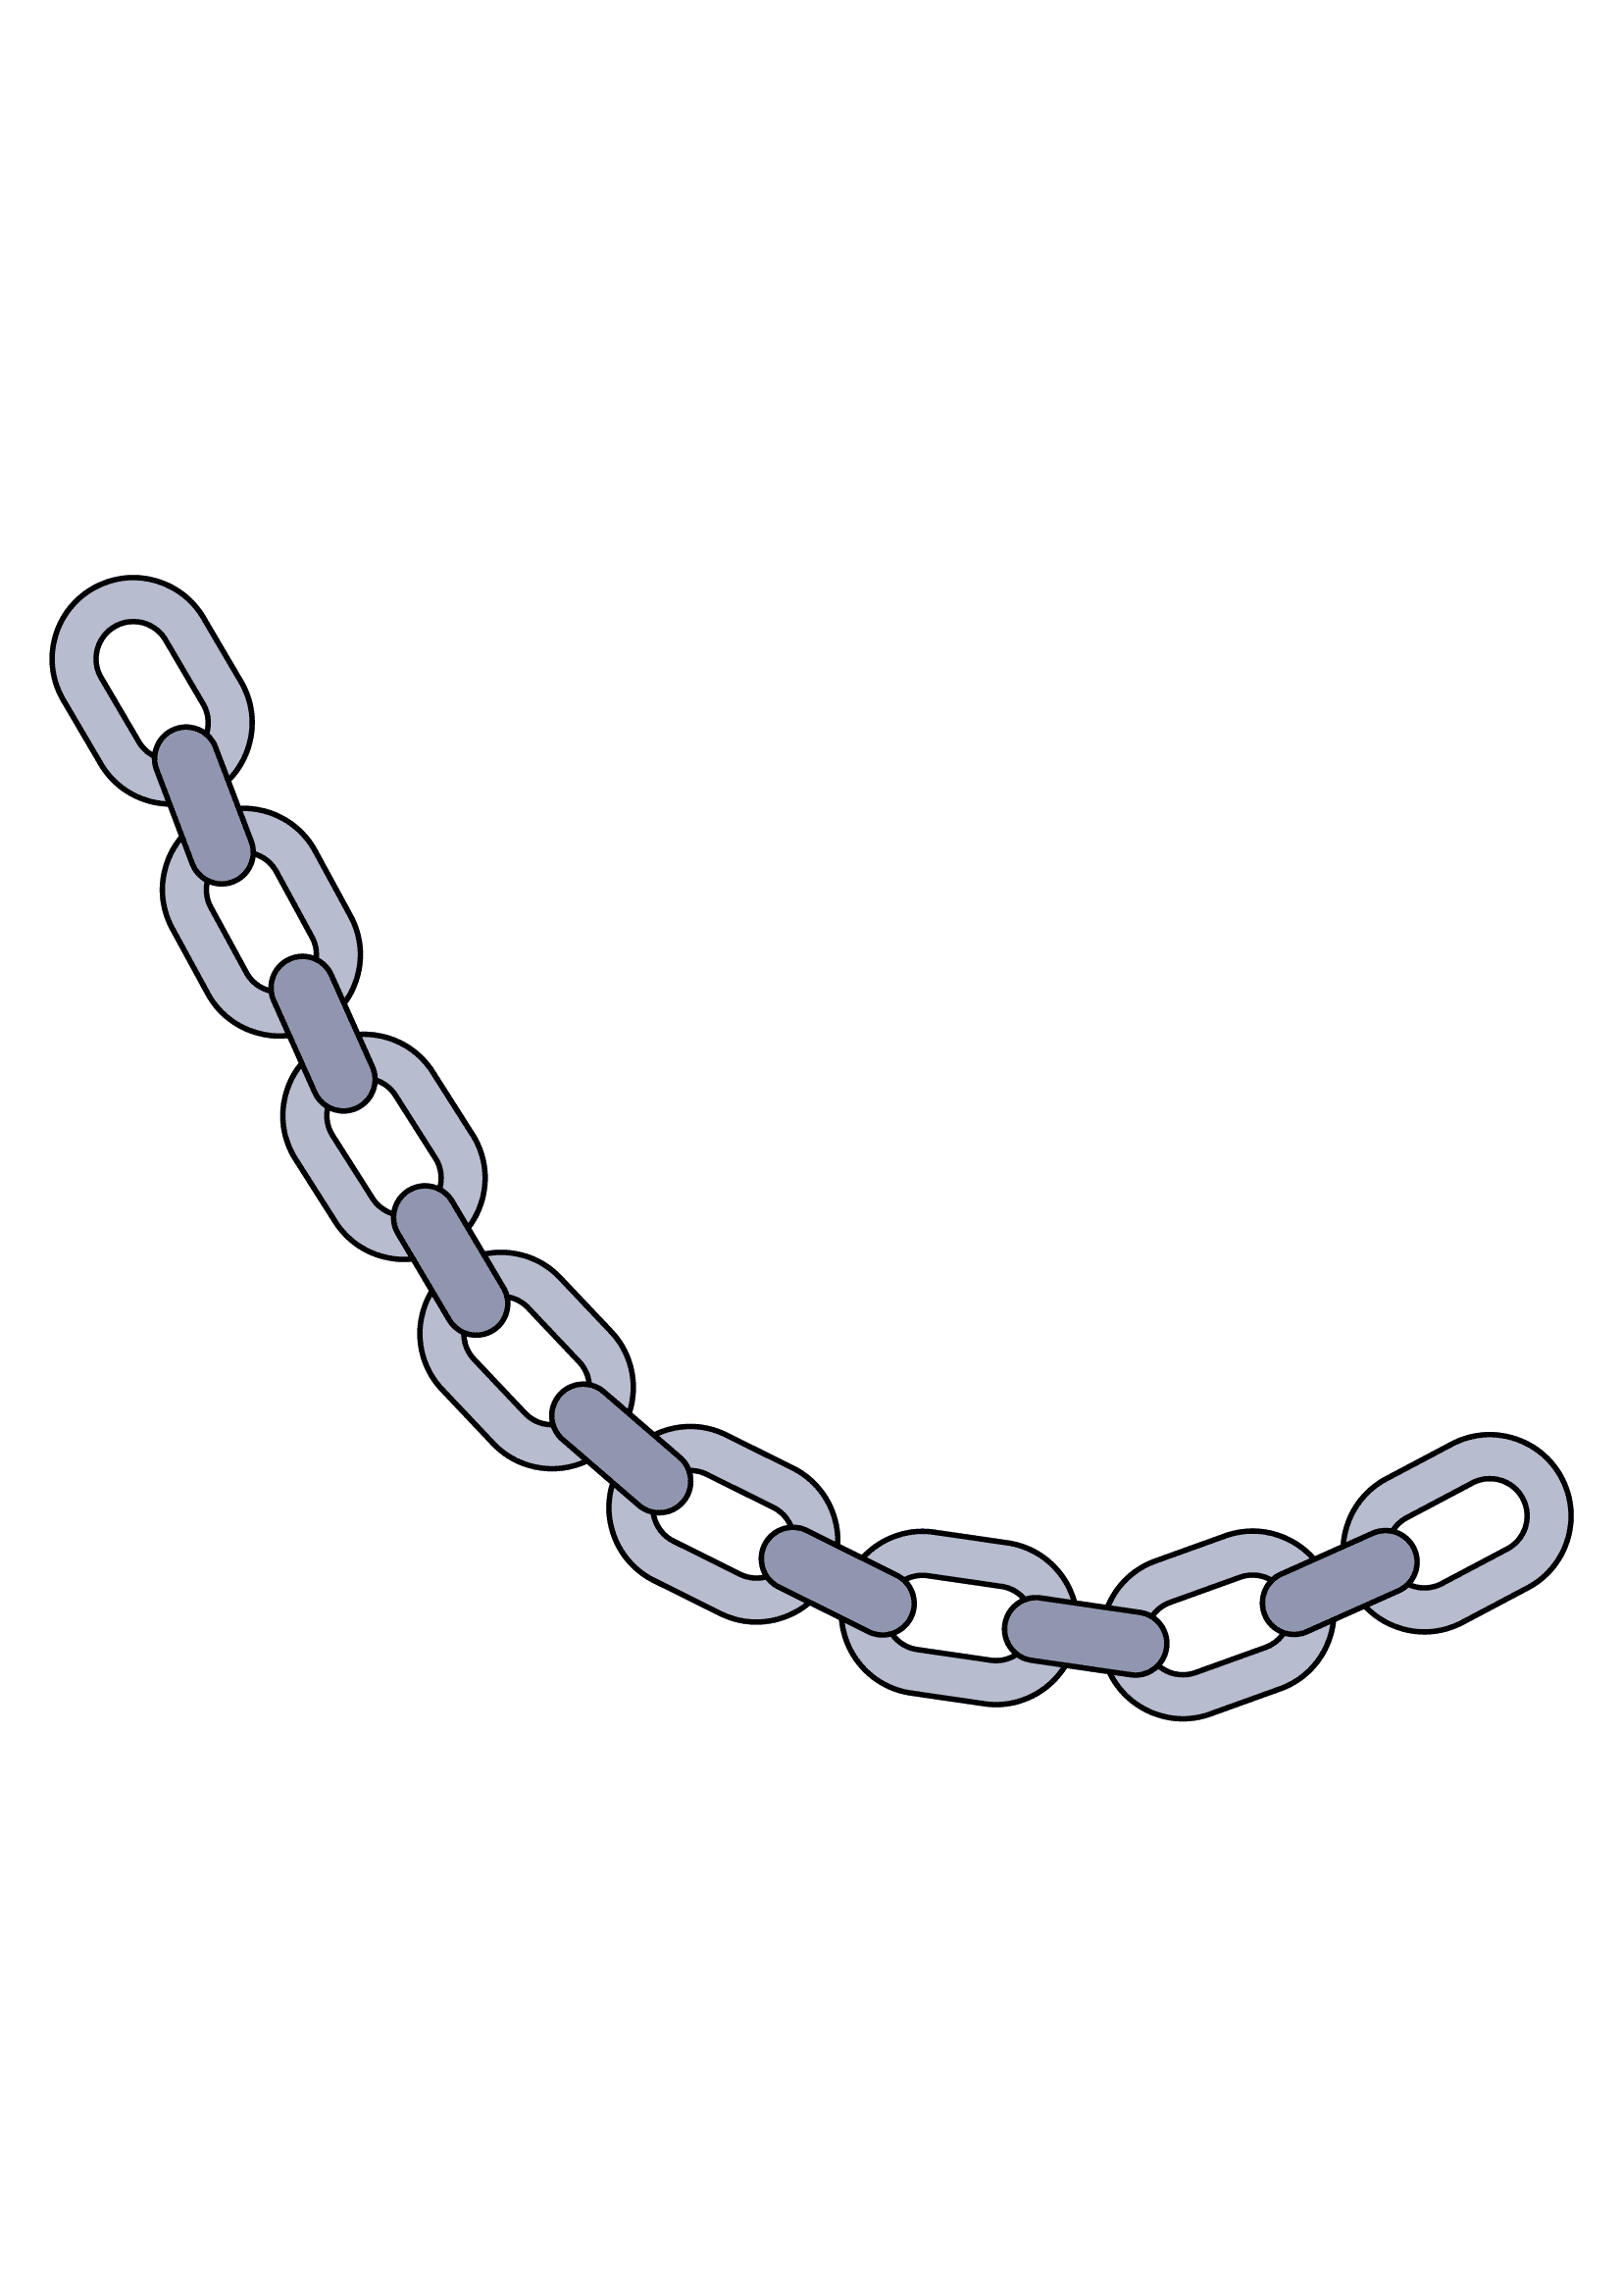 How to Draw A Chain Step by Step Printable